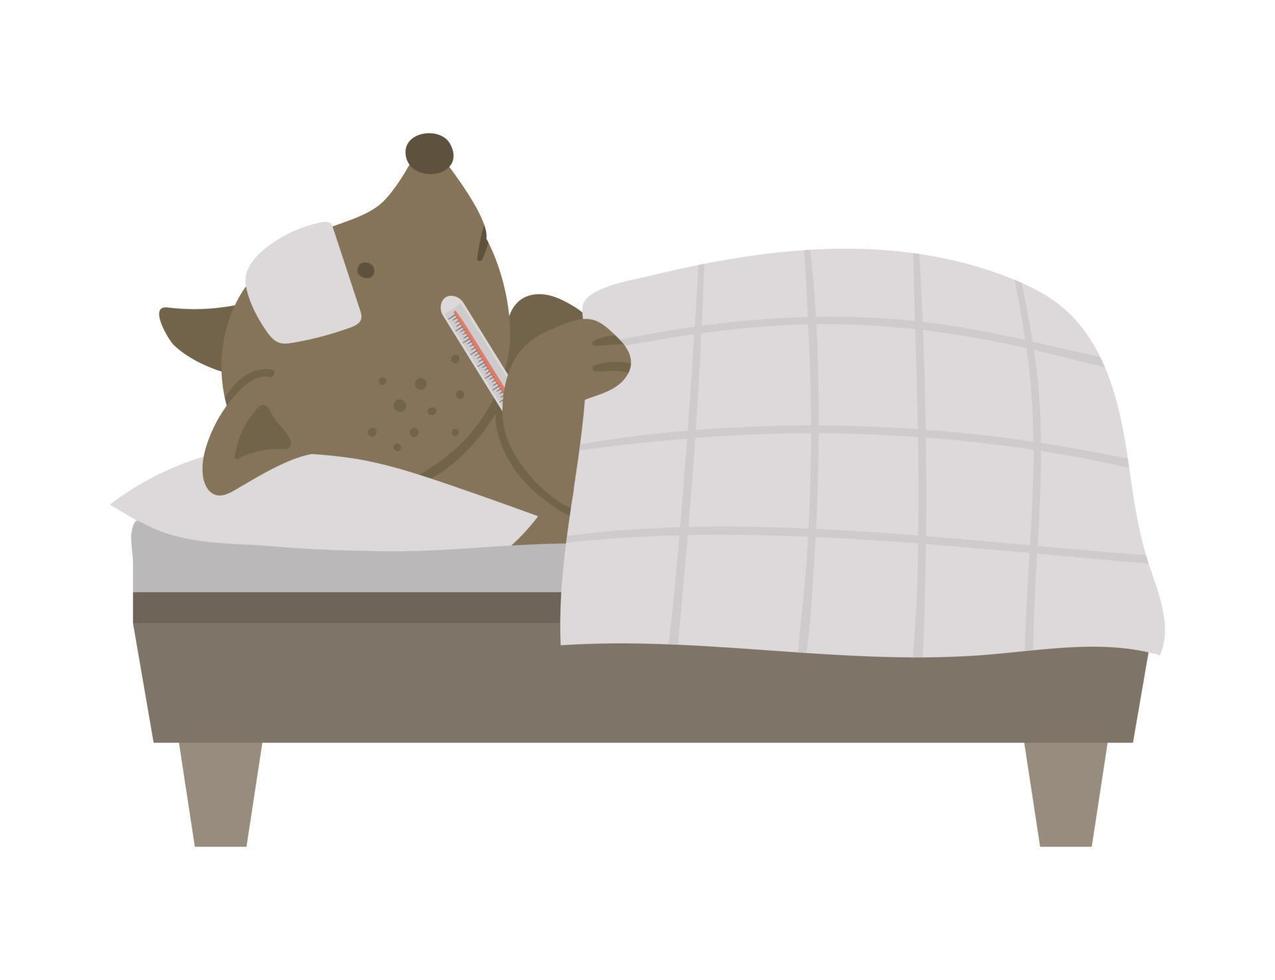 Vector ill animal in bed. Cute dog with thermometer having fever. Funny hospital patient character. Medical illustration for children.